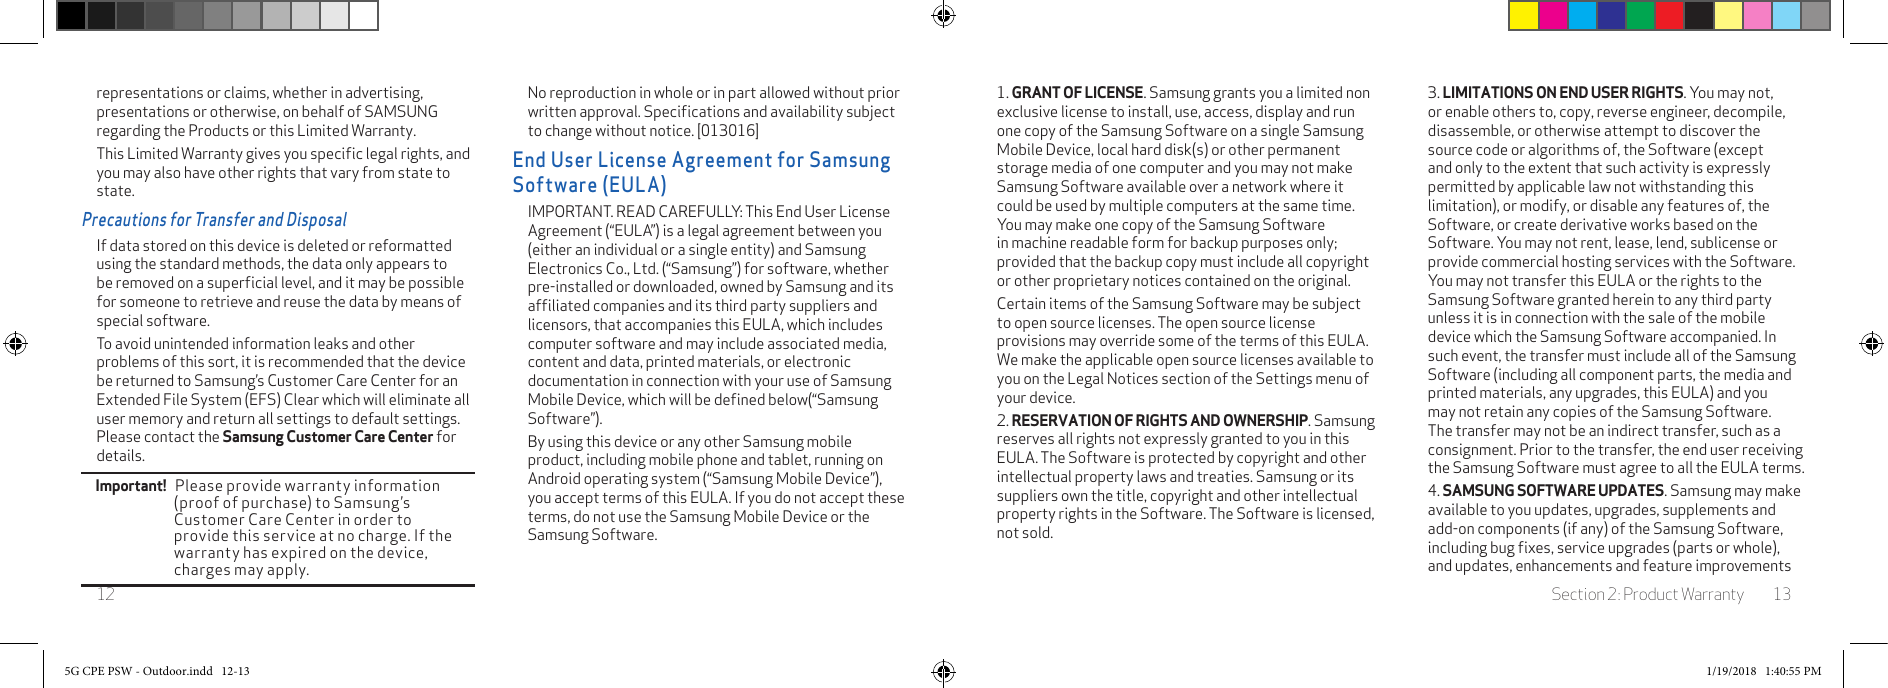 Section 2: Product Warranty 13121. GRANT OF LICENSE. Samsung grants you a limited non exclusive license to install, use, access, display and run one copy of the Samsung Software on a single Samsung Mobile Device, local hard disk(s) or other permanent storage media of one computer and you may not make  Samsung Software available over a network where it could be used by multiple computers at the same time. You may make one copy of the Samsung Software in machine readable form for backup purposes only; provided that the backup copy must include all copyright or other proprietary notices contained on the original. Certain items of the Samsung Software may be subject to open source licenses. The open source license provisions may override some of the terms of this EULA. We make the applicable open source licenses available to you on the Legal Notices section of the Settings menu of your device. 2. RESERVATION OF RIGHTS AND OWNERSHIP. Samsung reserves all rights not expressly granted to you in this EULA. The Software is protected by copyright and other intellectual property laws and treaties. Samsung or its suppliers own the title, copyright and other intellectual property rights in the Software. The Software is licensed, not sold.3. LIMITATIONS ON END USER RIGHTS. You may not, or enable others to, copy, reverse engineer, decompile, disassemble, or otherwise attempt to discover the source code or algorithms of, the Software (except and only to the extent that such activity is expressly permitted by applicable law not withstanding this limitation), or modify, or disable any features of, the Software, or create derivative works based on the Software. You may not rent, lease, lend, sublicense or provide commercial hosting services with the Software. You may not transfer this EULA or the rights to the Samsung Software granted herein to any third party unless it is in connection with the sale of the mobile device which the Samsung Software accompanied. In such event, the transfer must include all of the Samsung Software (including all component parts, the media and printed materials, any upgrades, this EULA) and you may not retain any copies of the Samsung Software. The transfer may not be an indirect transfer, such as a consignment. Prior to the transfer, the end user receiving the Samsung Software must agree to all the EULA terms.4. SAMSUNG SOFTWARE UPDATES. Samsung may make available to you updates, upgrades, supplements and add-on components (if any) of the Samsung Software, including bug ﬁxes, service upgrades (parts or whole), and updates, enhancements and feature improvements representations or claims, whether in advertising, presentations or otherwise, on behalf of SAMSUNG regarding the Products or this Limited Warranty.This Limited Warranty gives you speciﬁc legal rights, and you may also have other rights that vary from state to state.Precautions for Transfer and DisposalIf data stored on this device is deleted or reformatted using the standard methods, the data only appears to be removed on a superﬁcial level, and it may be possible for someone to retrieve and reuse the data by means of special software.To avoid unintended information leaks and other problems of this sort, it is recommended that the device be returned to Samsung’s Customer Care Center for an Extended File System (EFS) Clear which will eliminate all user memory and return all settings to default settings. Please contact the Samsung Customer Care Center for details.Important!   Please provide warranty information (proof of purchase) to Samsung’s Customer Care Center in order to provide this service at no charge. If the warranty has expired on the device, charges may apply.No reproduction in whole or in part allowed without prior written approval. Speciﬁcations and availability subject to change without notice. [013016]End User License Agreement for Samsung Software (EULA)IMPORTANT. READ CAREFULLY: This End User License Agreement (“EULA”) is a legal agreement between you (either an individual or a single entity) and Samsung Electronics Co., Ltd. (“Samsung”) for software, whether pre-installed or downloaded, owned by Samsung and its afﬁliated companies and its third party suppliers and licensors, that accompanies this EULA, which includes computer software and may include associated media, content and data, printed materials, or electronic documentation in connection with your use of Samsung Mobile Device, which will be deﬁned below(“Samsung Software”). By using this device or any other Samsung mobile product, including mobile phone and tablet, running on Android operating system (“Samsung Mobile Device”), you accept terms of this EULA. If you do not accept these terms, do not use the Samsung Mobile Device or the Samsung Software.5G CPE PSW - Outdoor.indd   12-13 1/19/2018   1:40:55 PM